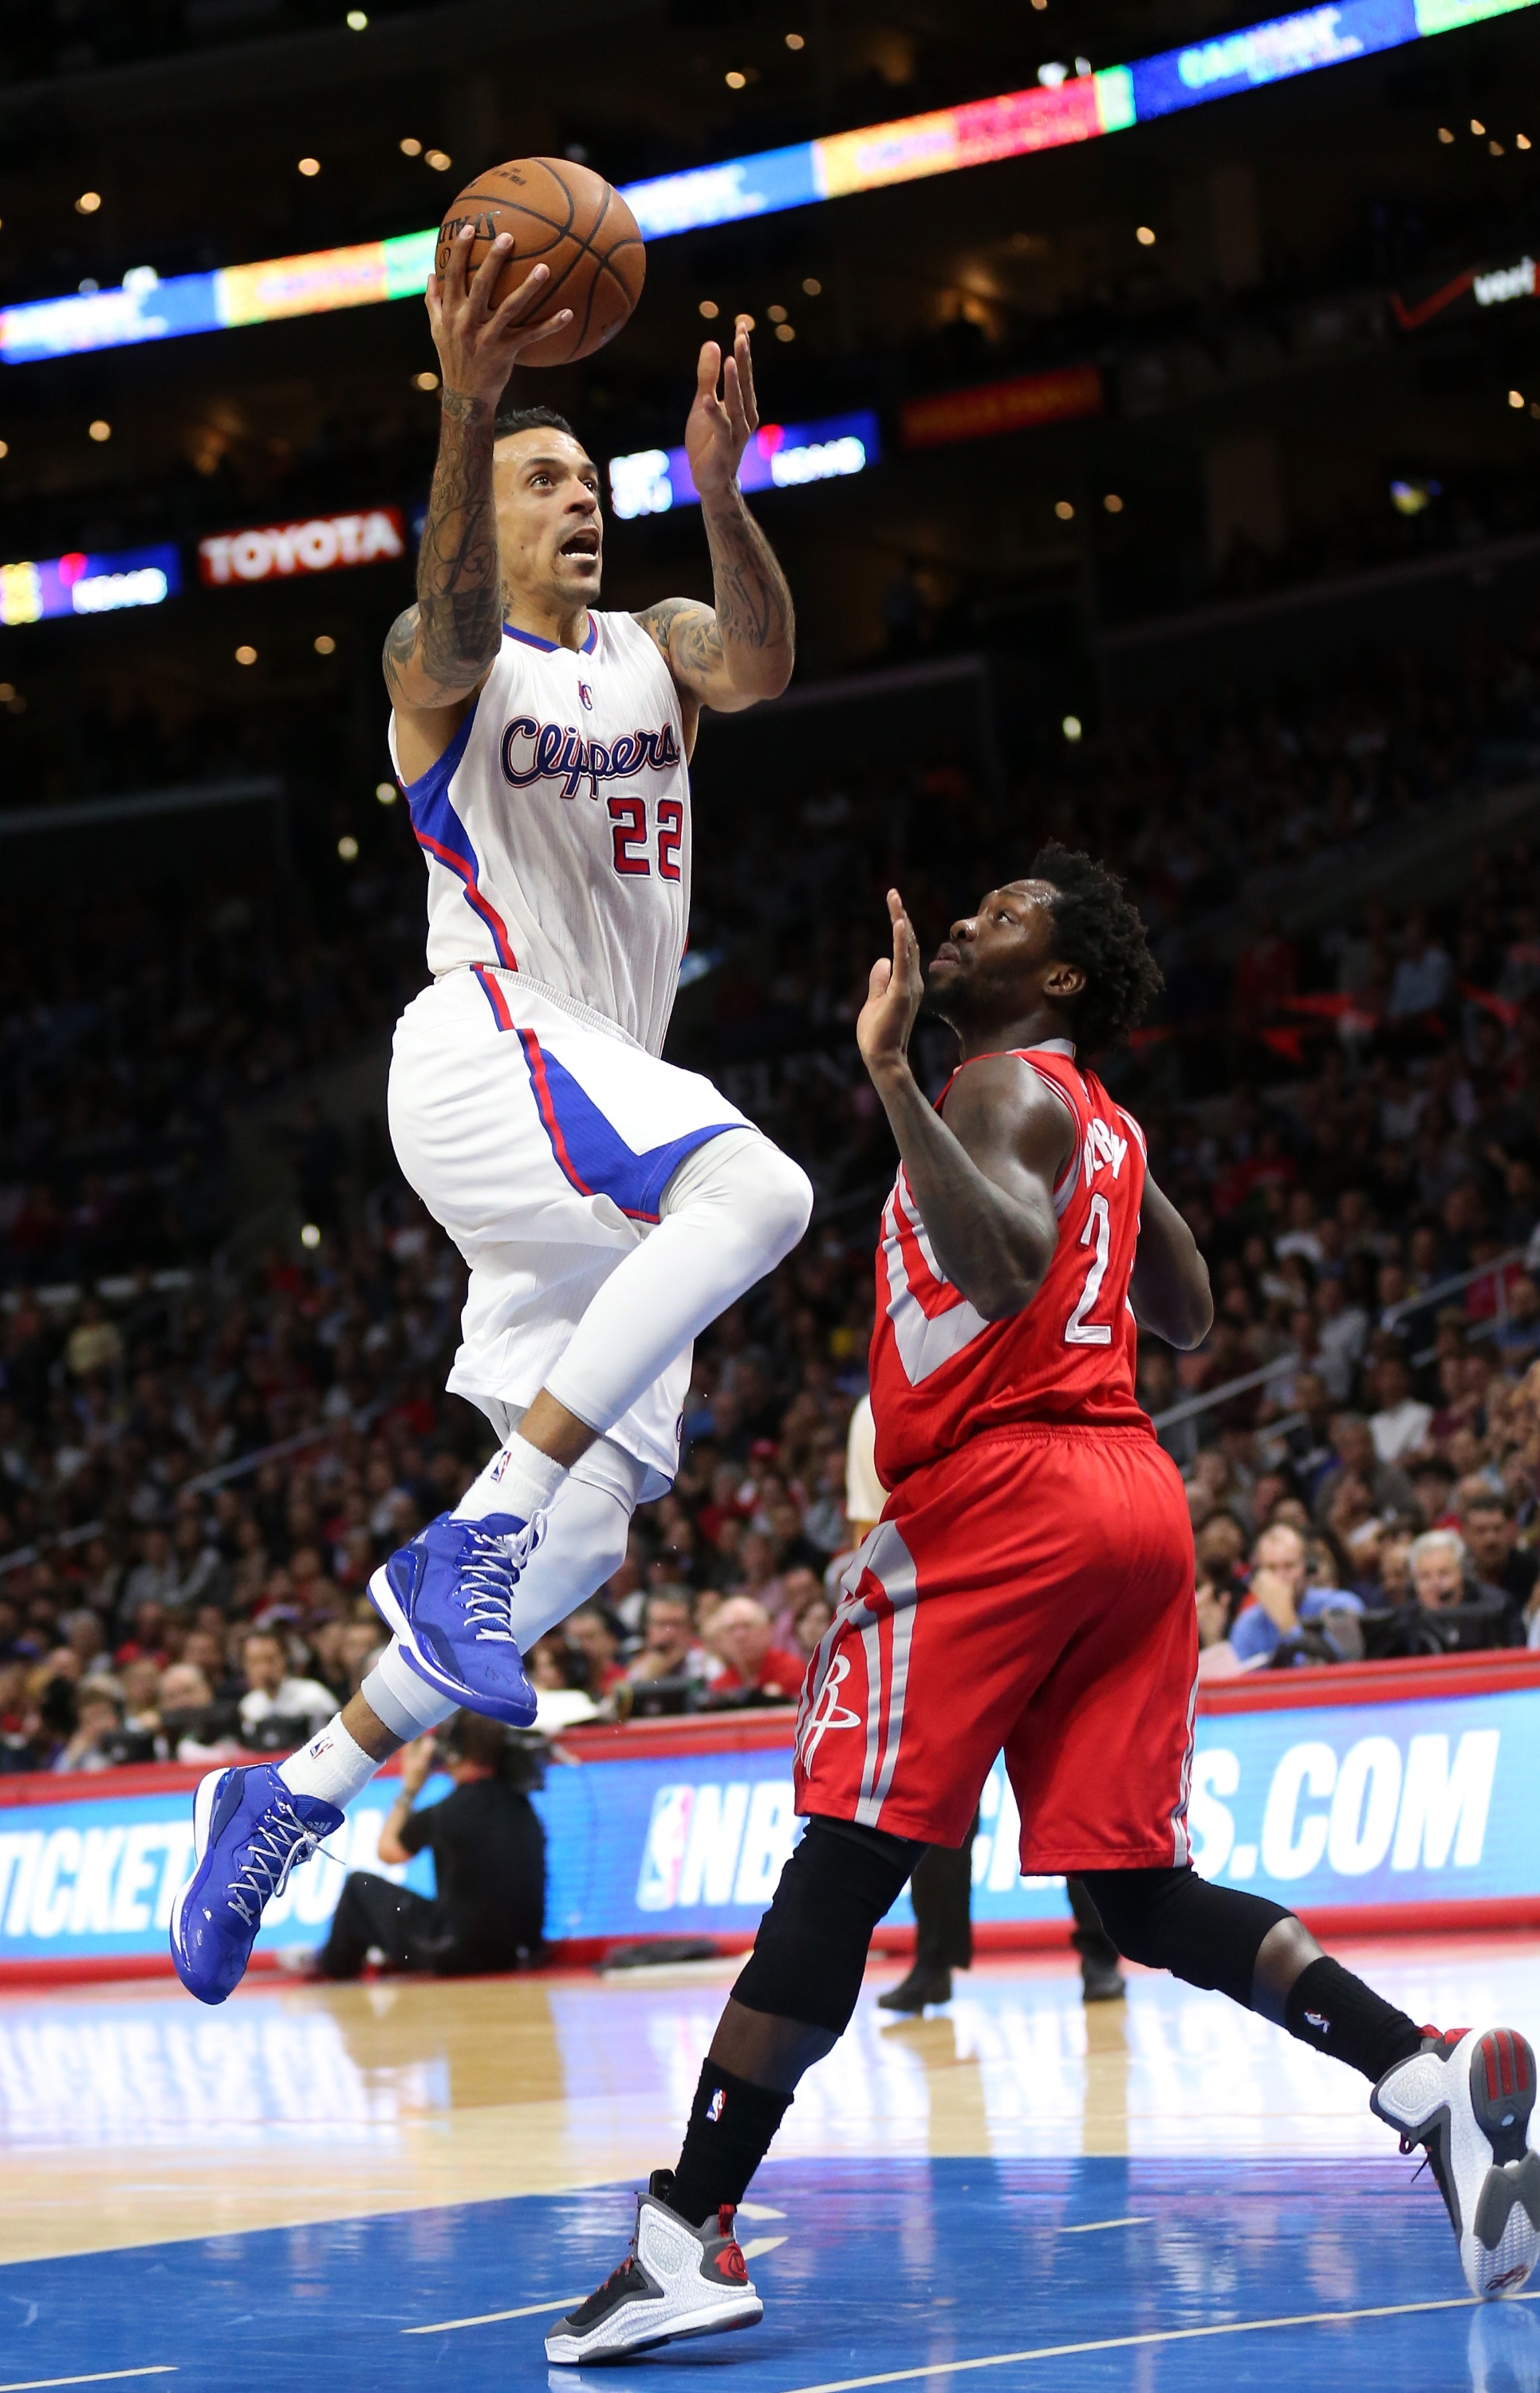 LOS ANGELES, CA - FEBRUARY 11: Matt Barnes #22 of the Los Angeles Clippers goes up for a shot over Patrick Beverley #2 of the Houston Rockets at Staples Center on February 11, 2015 in Los Angeles, California. The Clippers won 105-95. NOTE TO USER: User expressly acknowledges and agrees that, by downloading and or using this photograph, User is consenting to the terms and conditions of the Getty Images License Agreement. (Photo by Stephen Dunn/Getty Images)